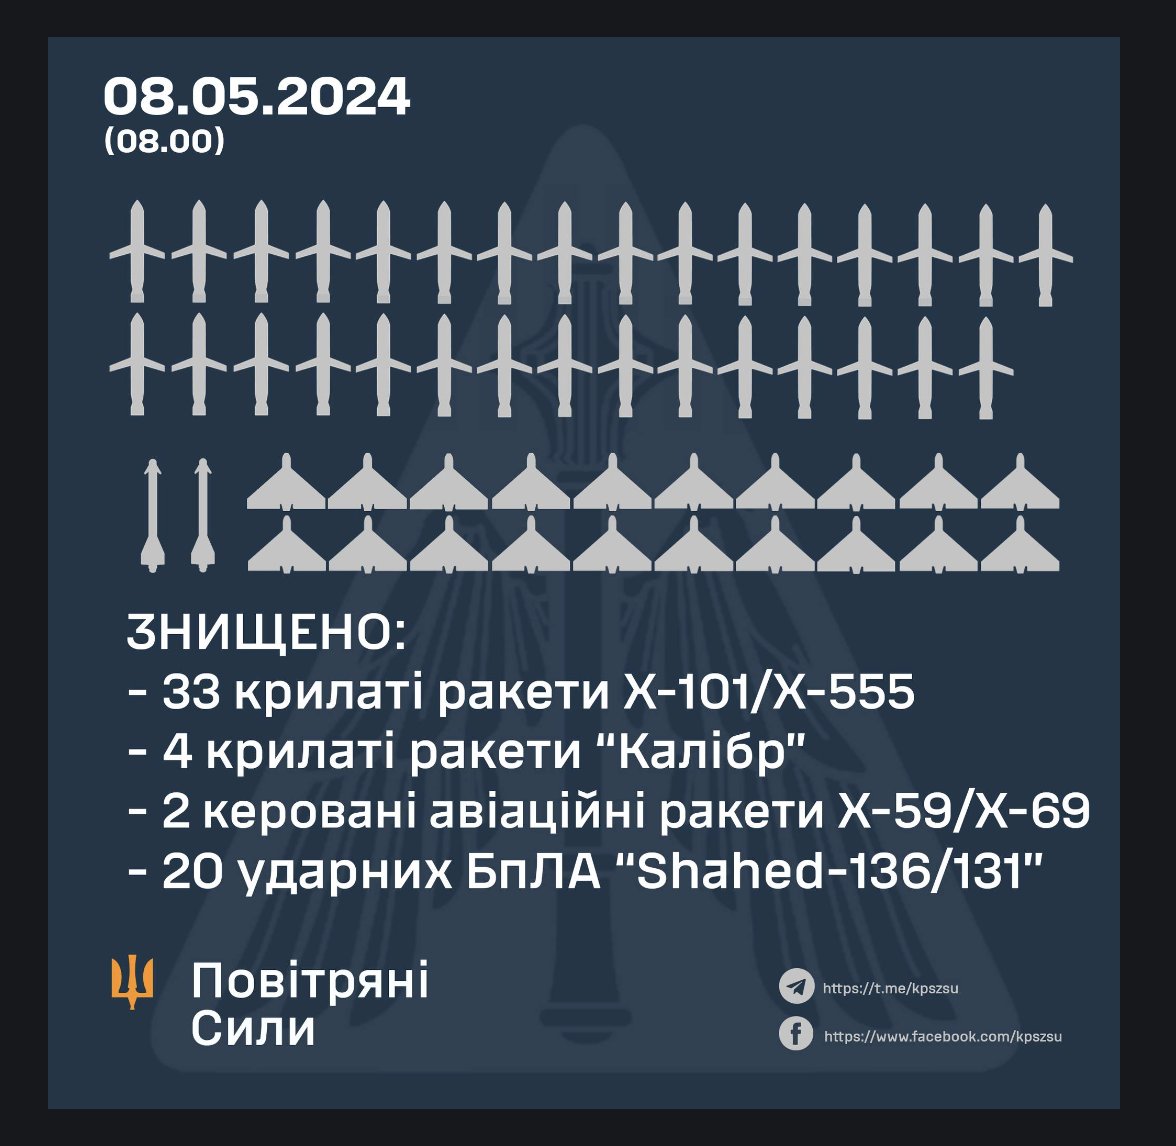 Another large Russian missile and drone attack on Ukraine last night, once again targeting energy infrastructure. 55 missiles of various types and 21 drones were fired at targets across Ukraine - 39 missiles and 20 drones were intercepted according to the Ukrainian Air Force.